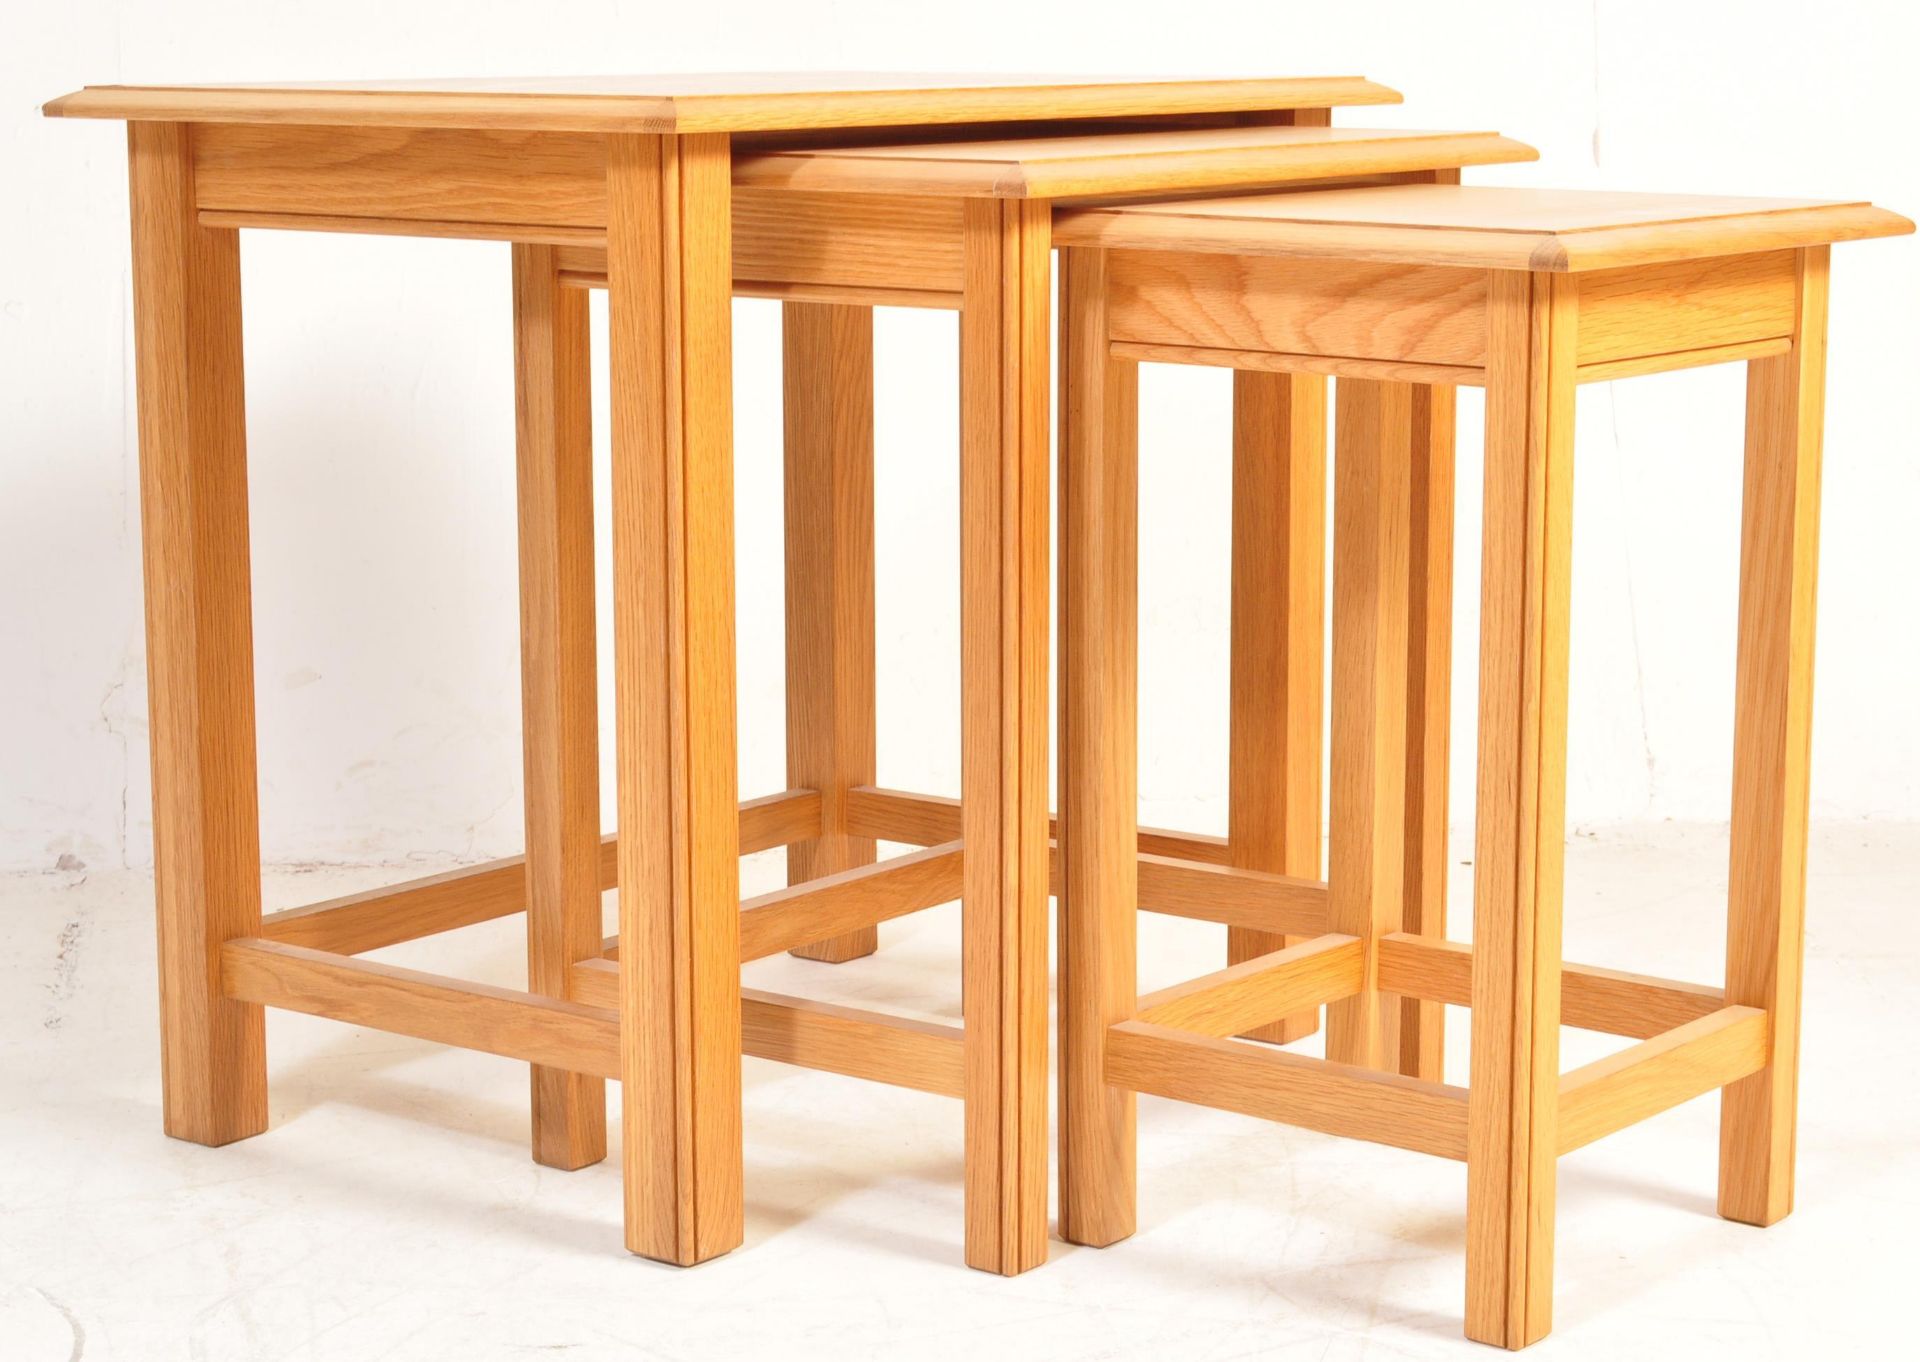 20TH CENTURY CHUNKY OAK FURNITURE LAND NEST OF TABLES - Image 3 of 4